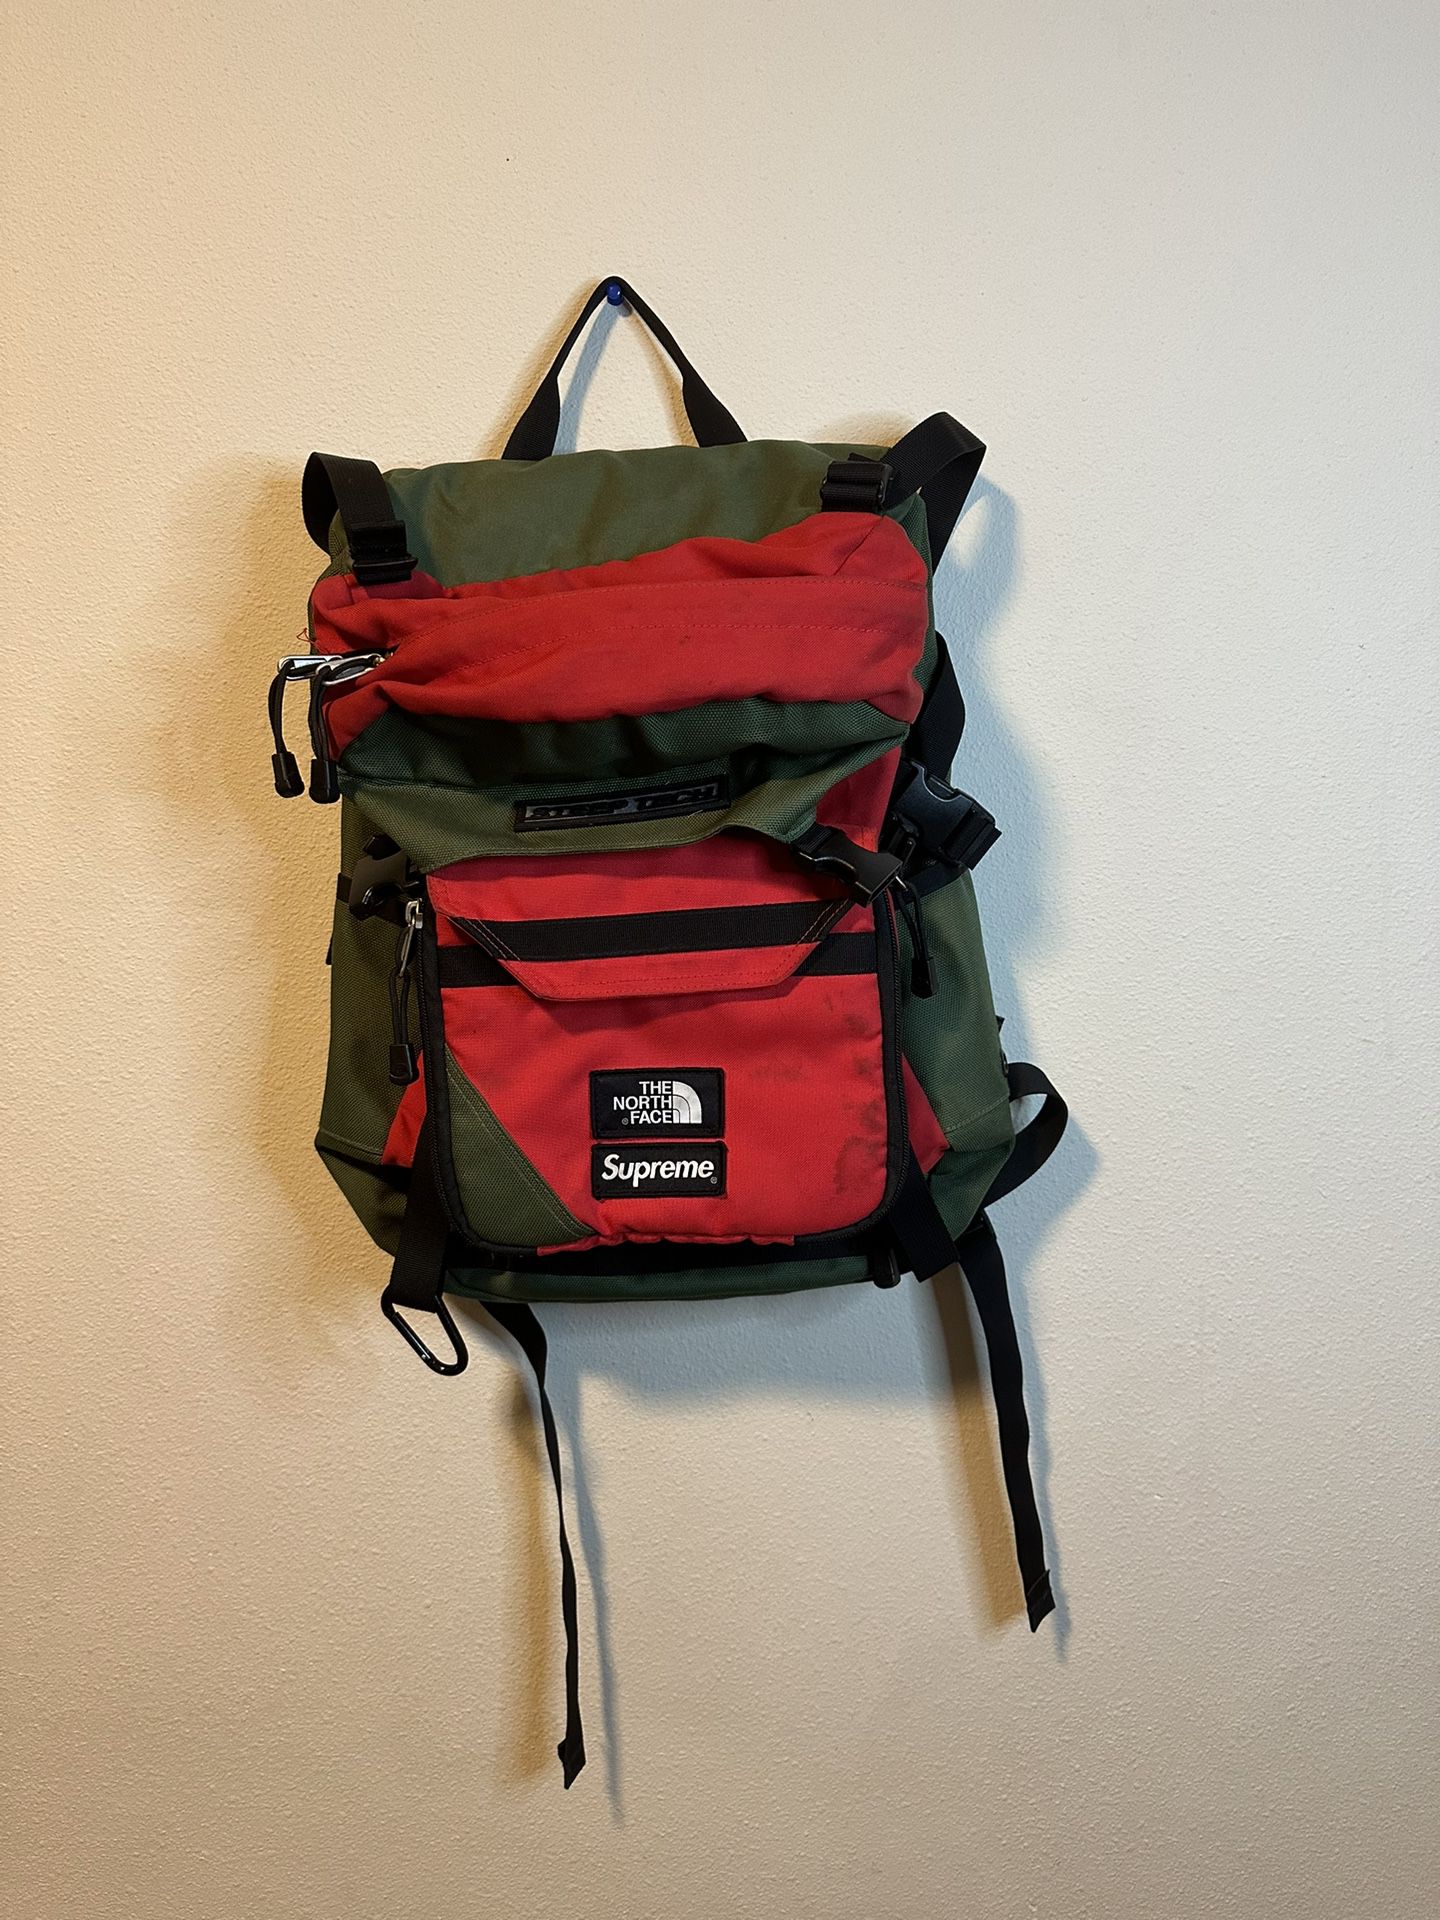 SS16 Supreme x The North Face Steep Tech backpack black TNF bag 16ss Olive RED